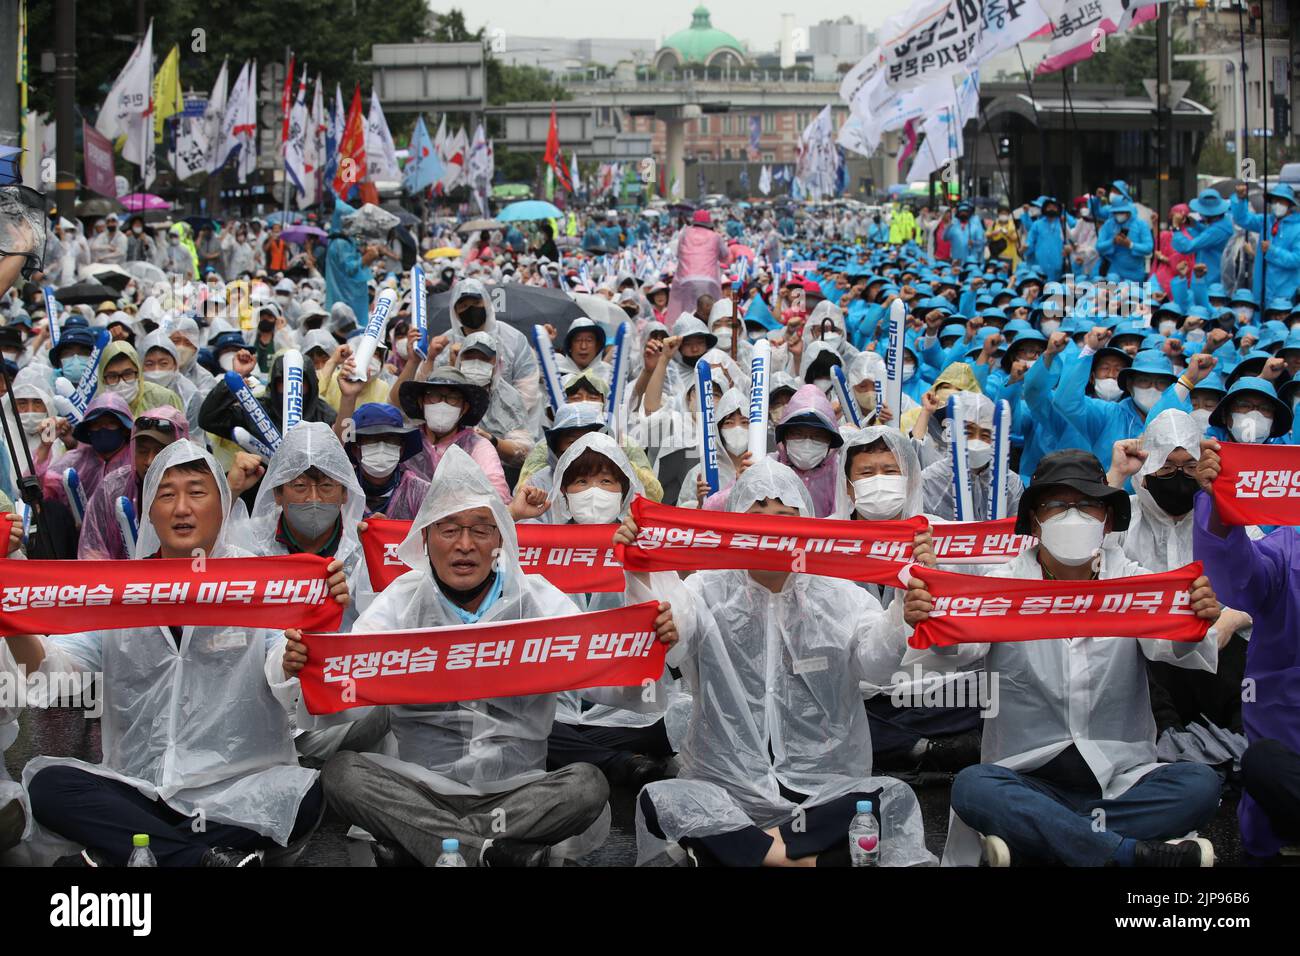 (220816) -- SEOUL, Aug. 16, 2022 (Xinhua) -- People rally to protest against the planned South Korea-U.S. military drills in Seoul, South Korea, Aug. 13, 2022. The combined forces of South Korea and the United States on Tuesday launched annual military drills as planned, three days after liberal activists held a massive rally to protest against it.   In protest against the planned South Korea-U.S. war games, thousands of liberal activists gathered in central Seoul on Saturday. (NEWSIS via Xinhua) Stock Photo